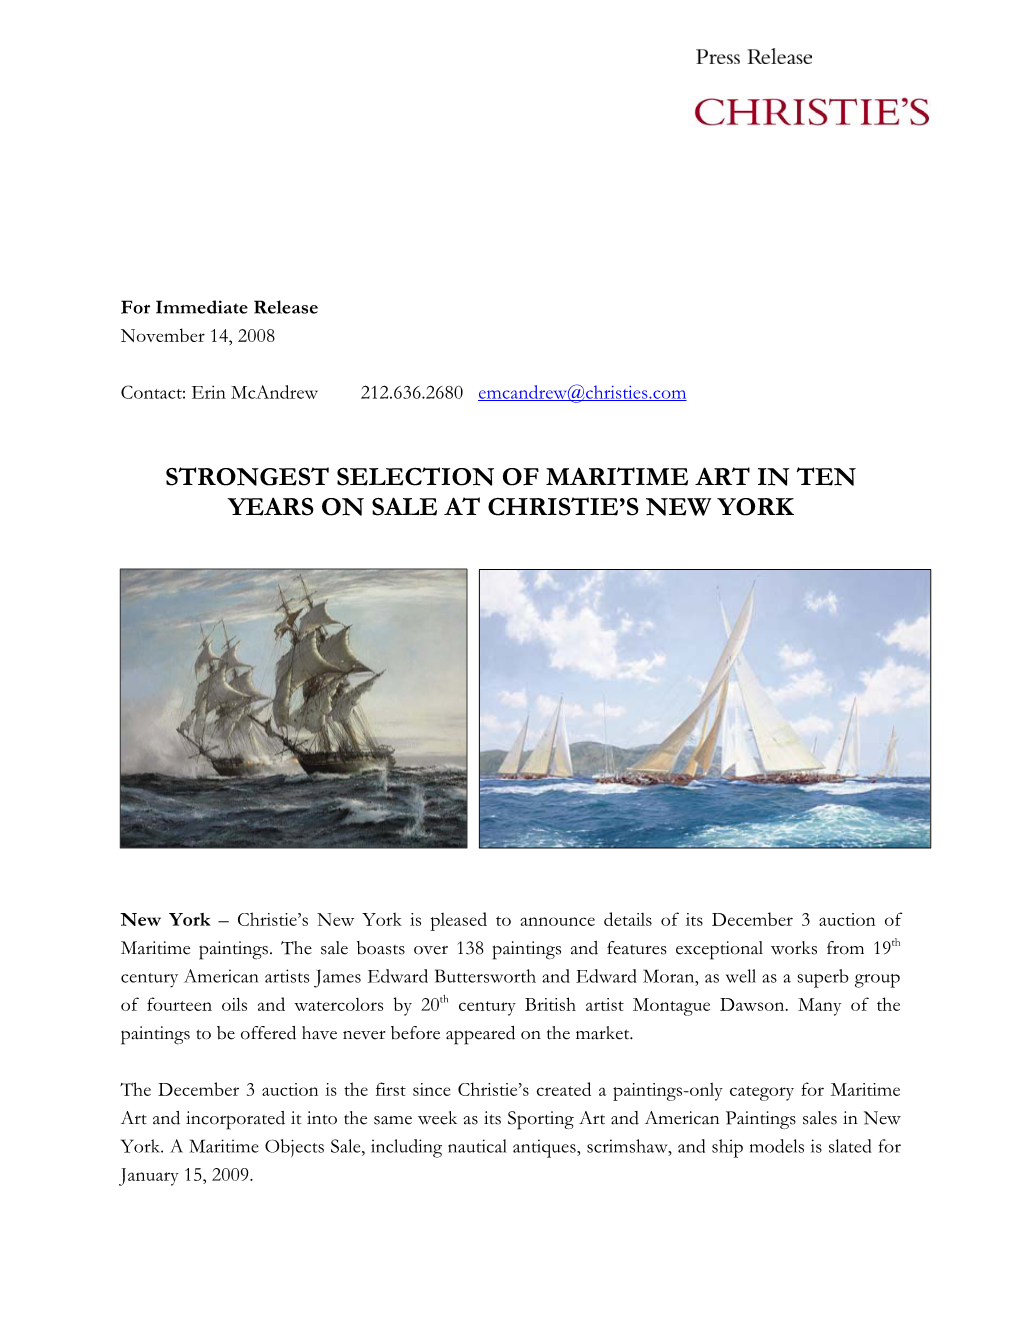 Strongest Selection of Maritime Art in Ten Years on Sale at Christie’S New York